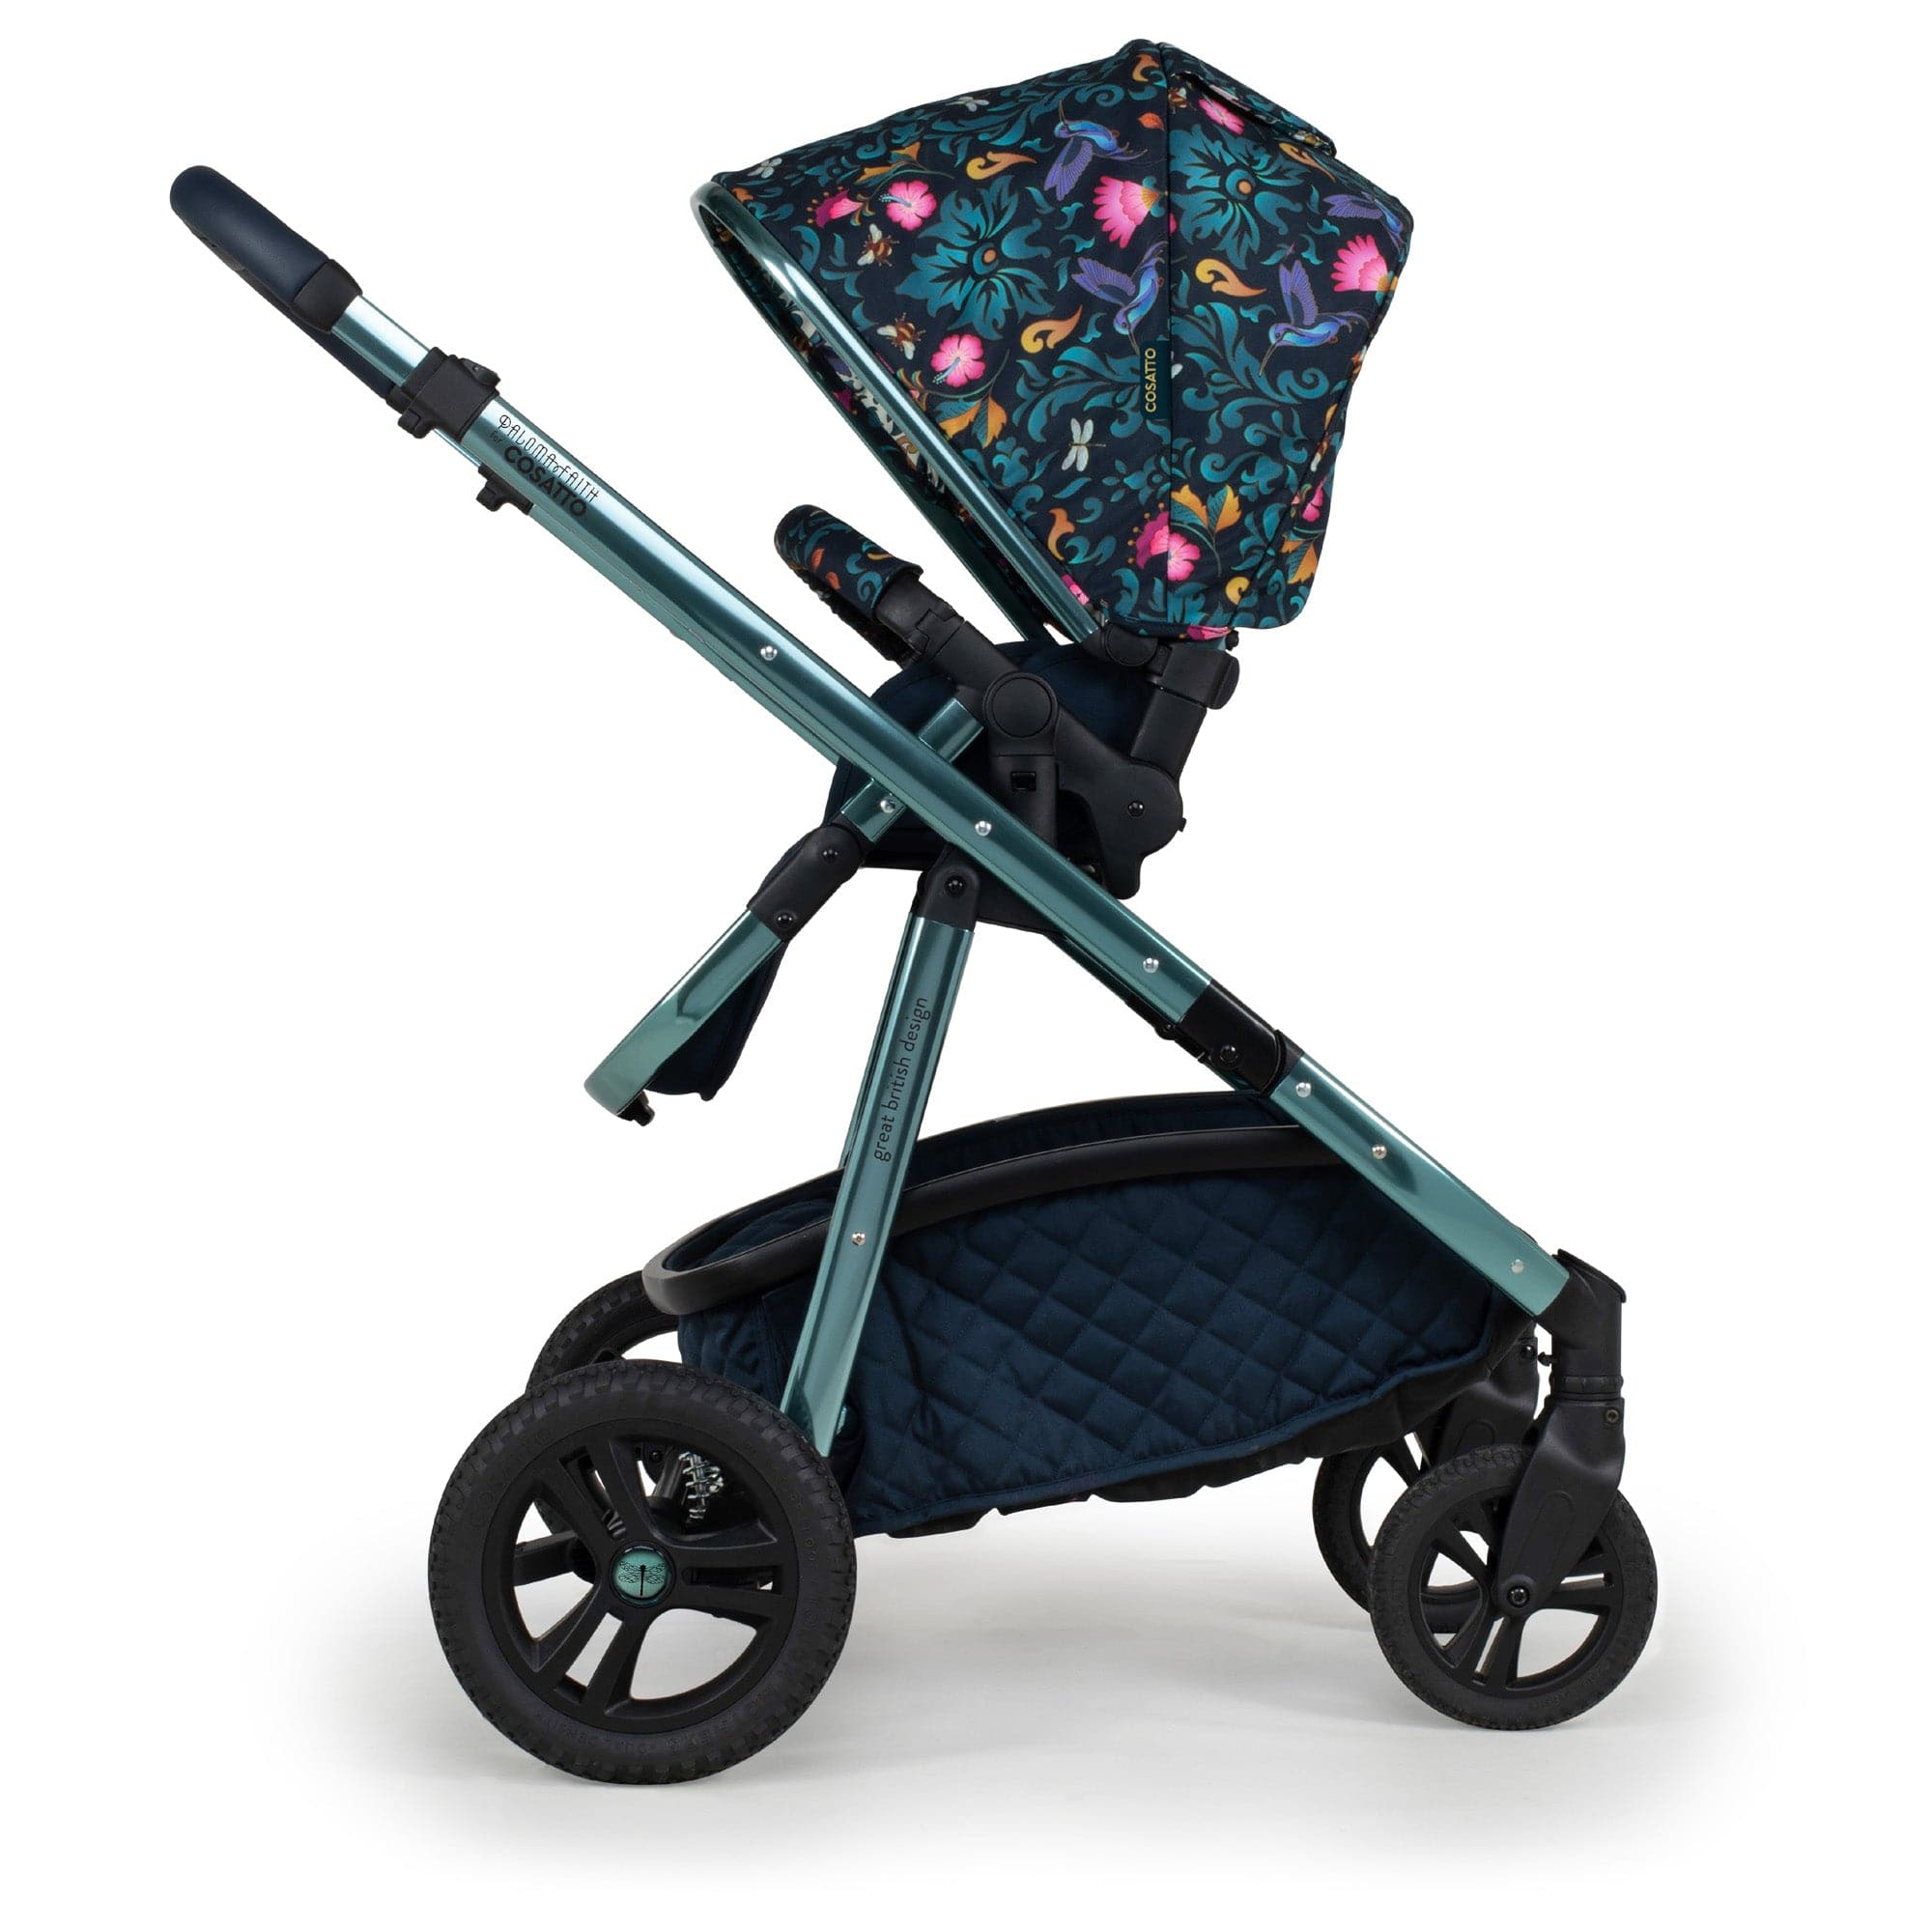 Cosatto baby prams Cosatto Wow Continental Pushchair/Pram and Accessories Wildling CT5298